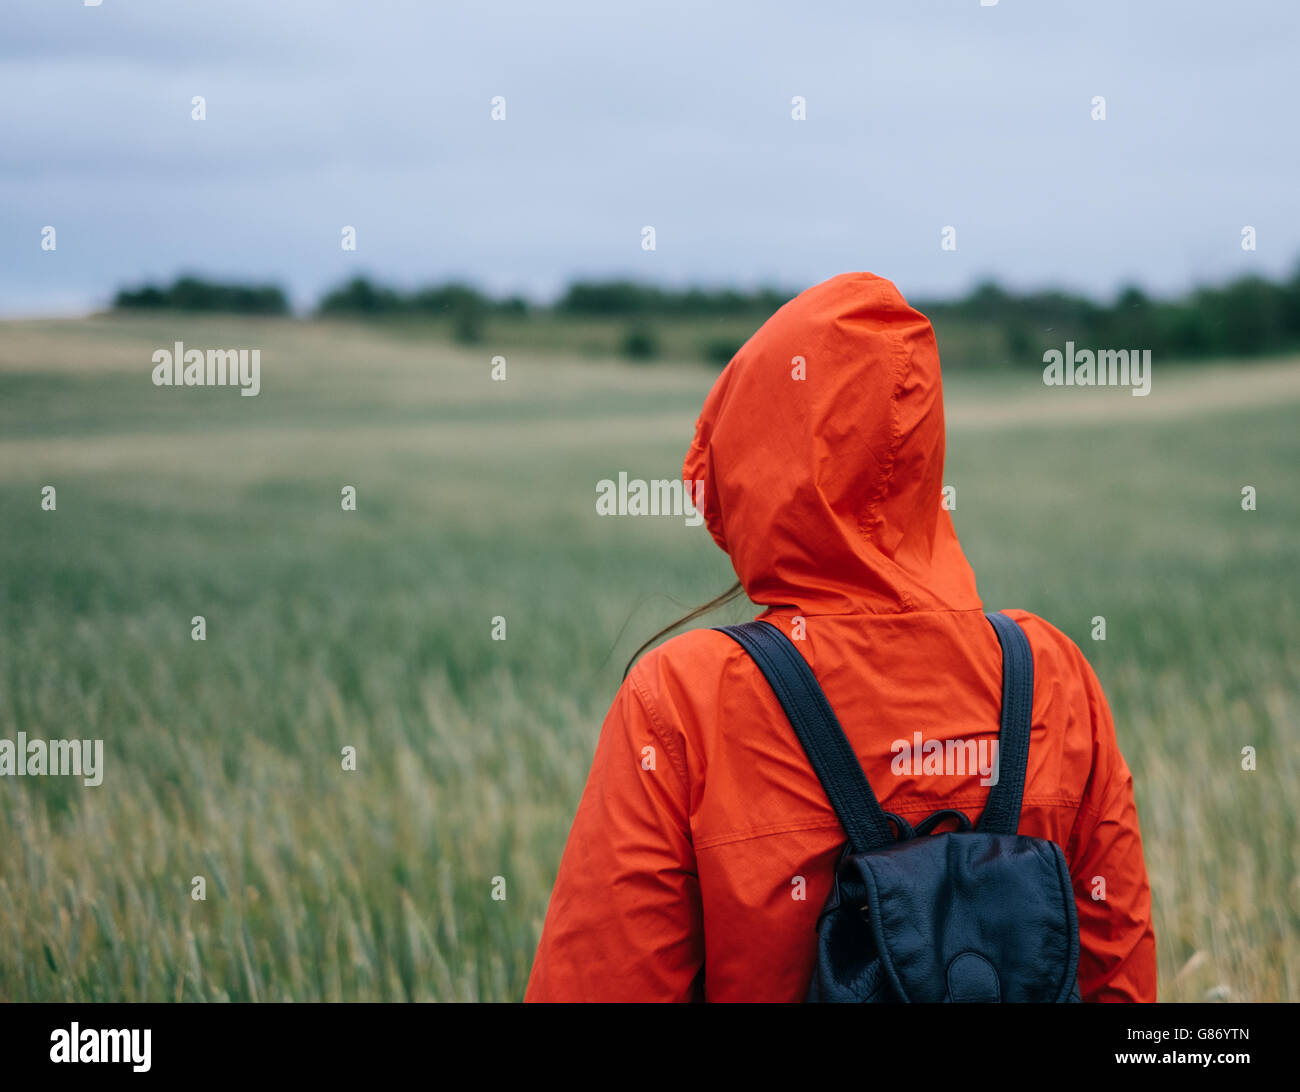 Rear view of woman in raincoat standing in field Stock Photo